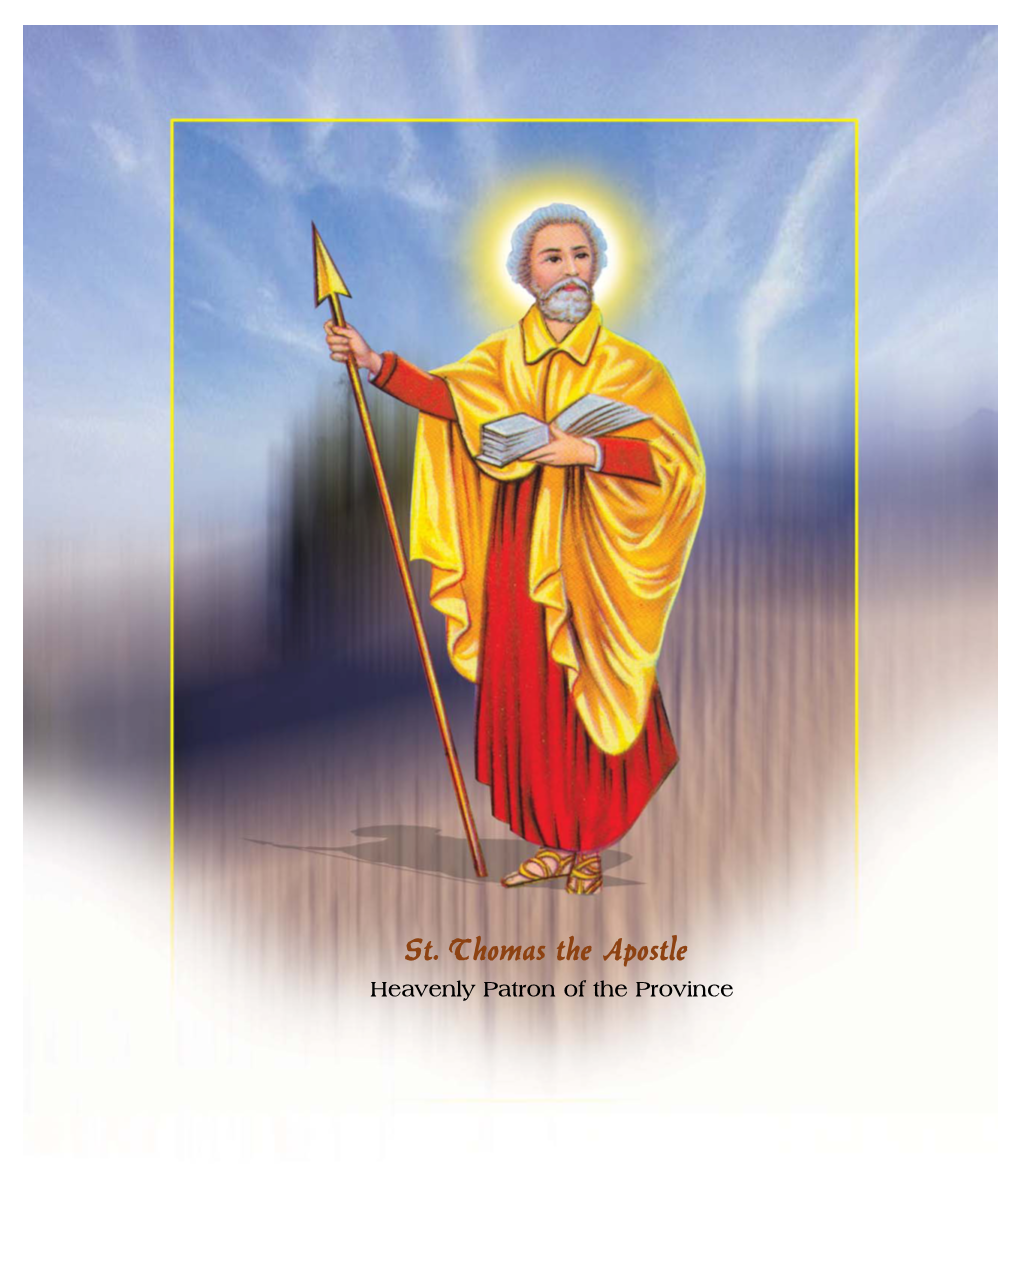 St. Thomas the Apostle Heavenly Patron of the Province